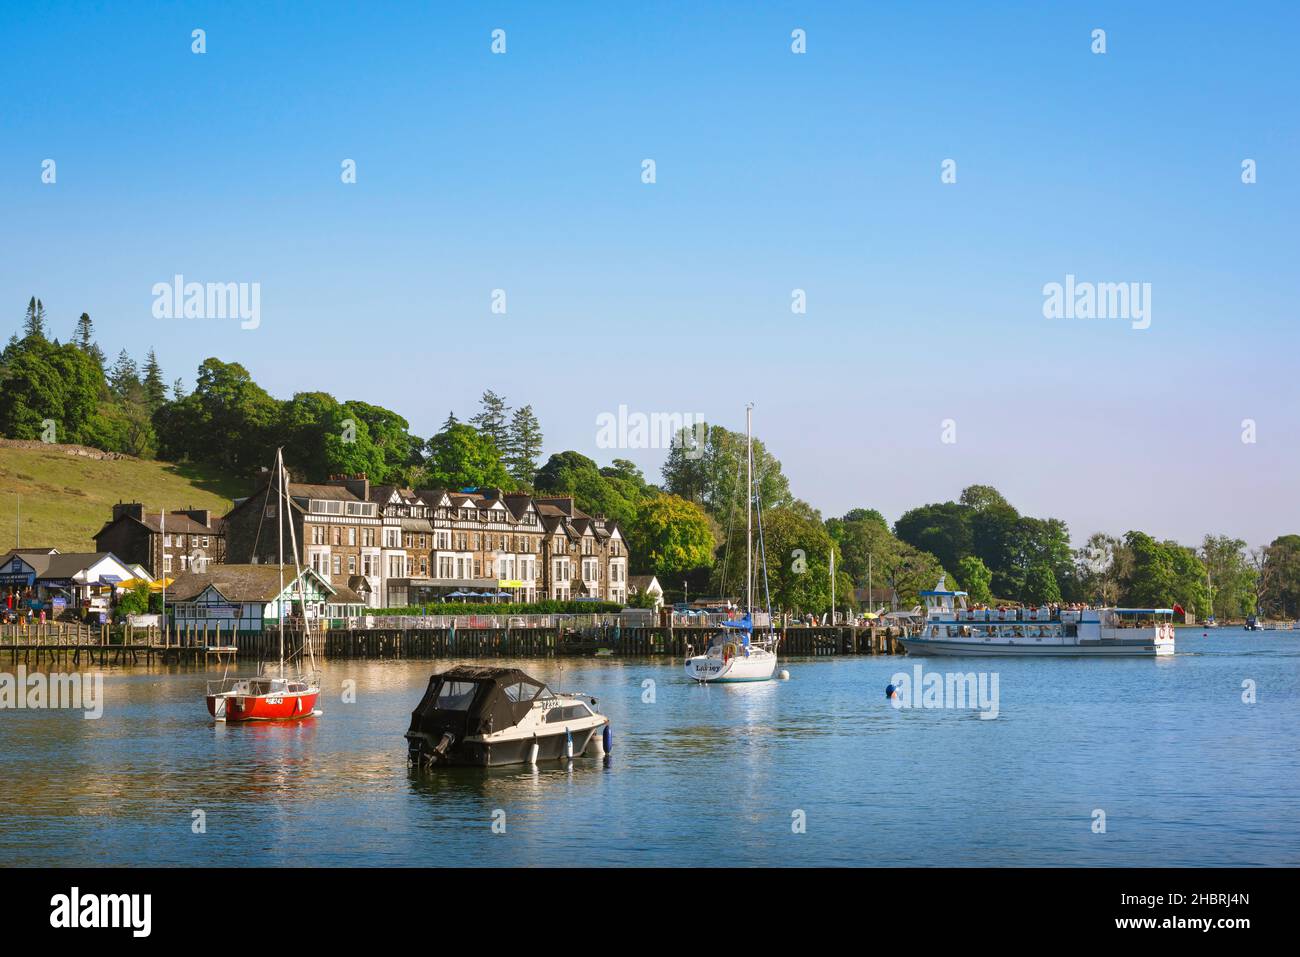 Waterhead Lake District, view in summer of the harbour in Waterhead at the north end of Lake Windermere, Cumbria, England, UK Stock Photo